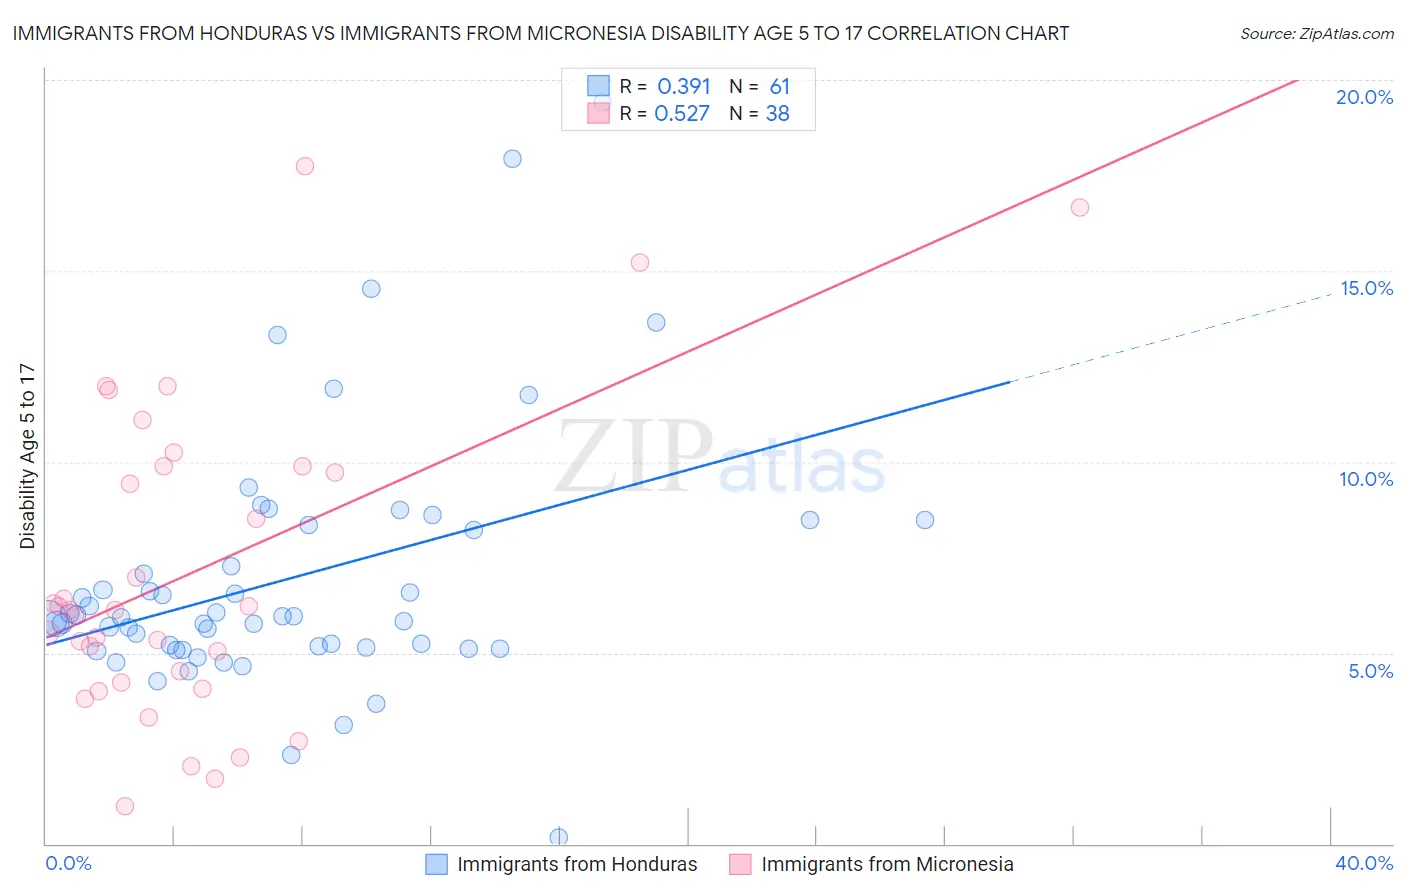 Immigrants from Honduras vs Immigrants from Micronesia Disability Age 5 to 17